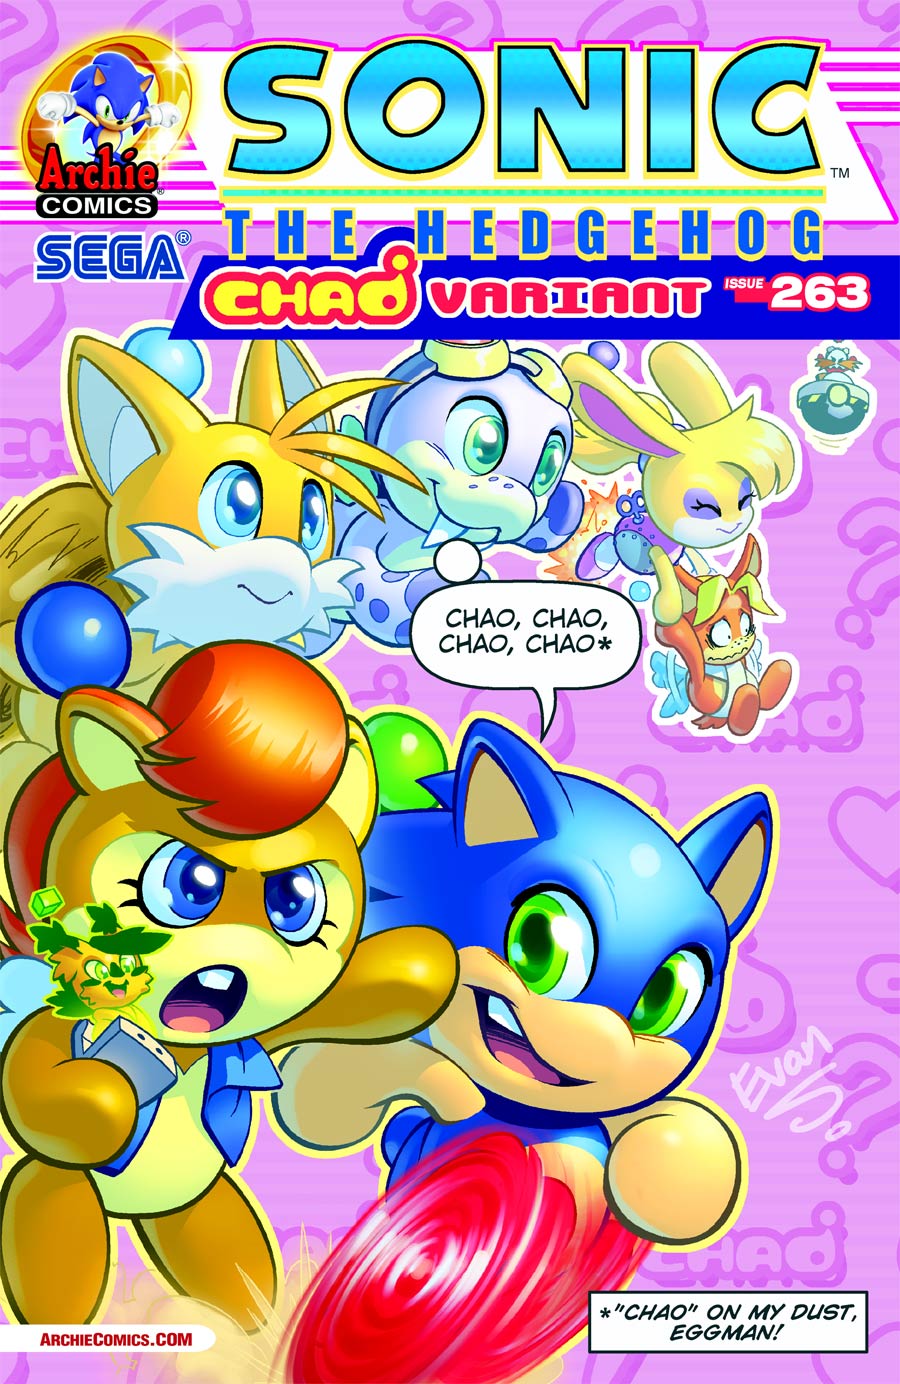 Sonic The Hedgehog Vol 2 #263 Cover B Variant Chao-Tastic Cover